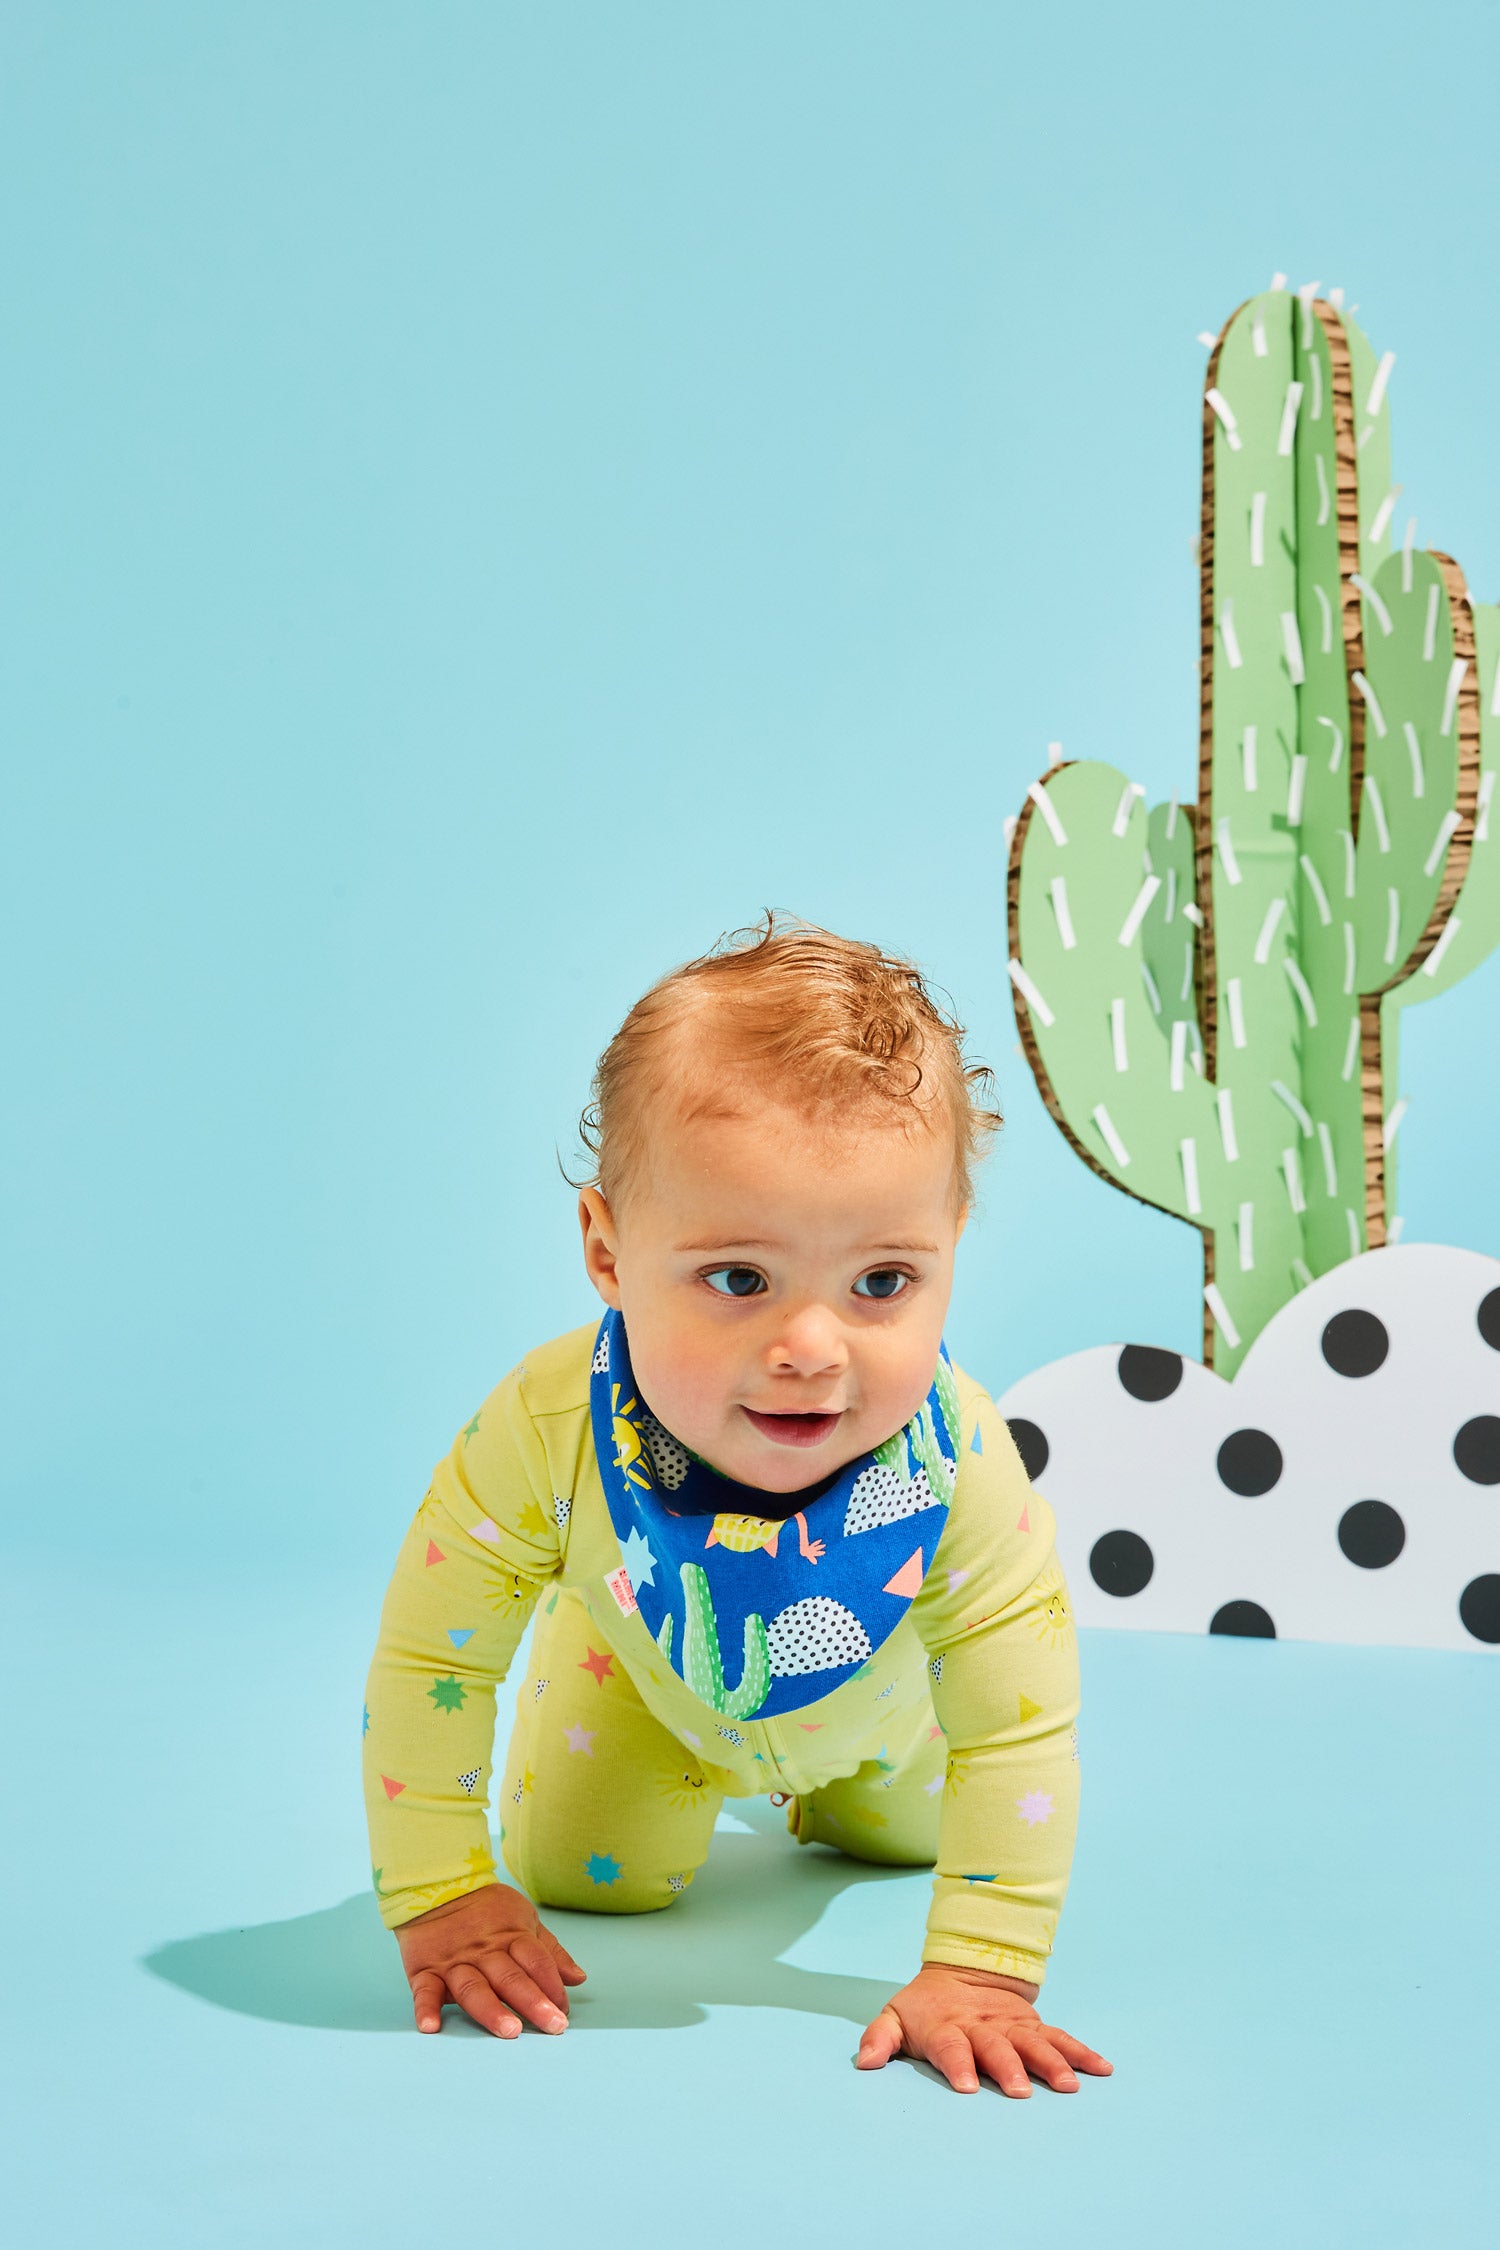 Children in patterned pyjamas play in a colourful background with custom Kitiya Palaskas cardboard props that include a sun, cactus, rainbow, clouds and butterfly